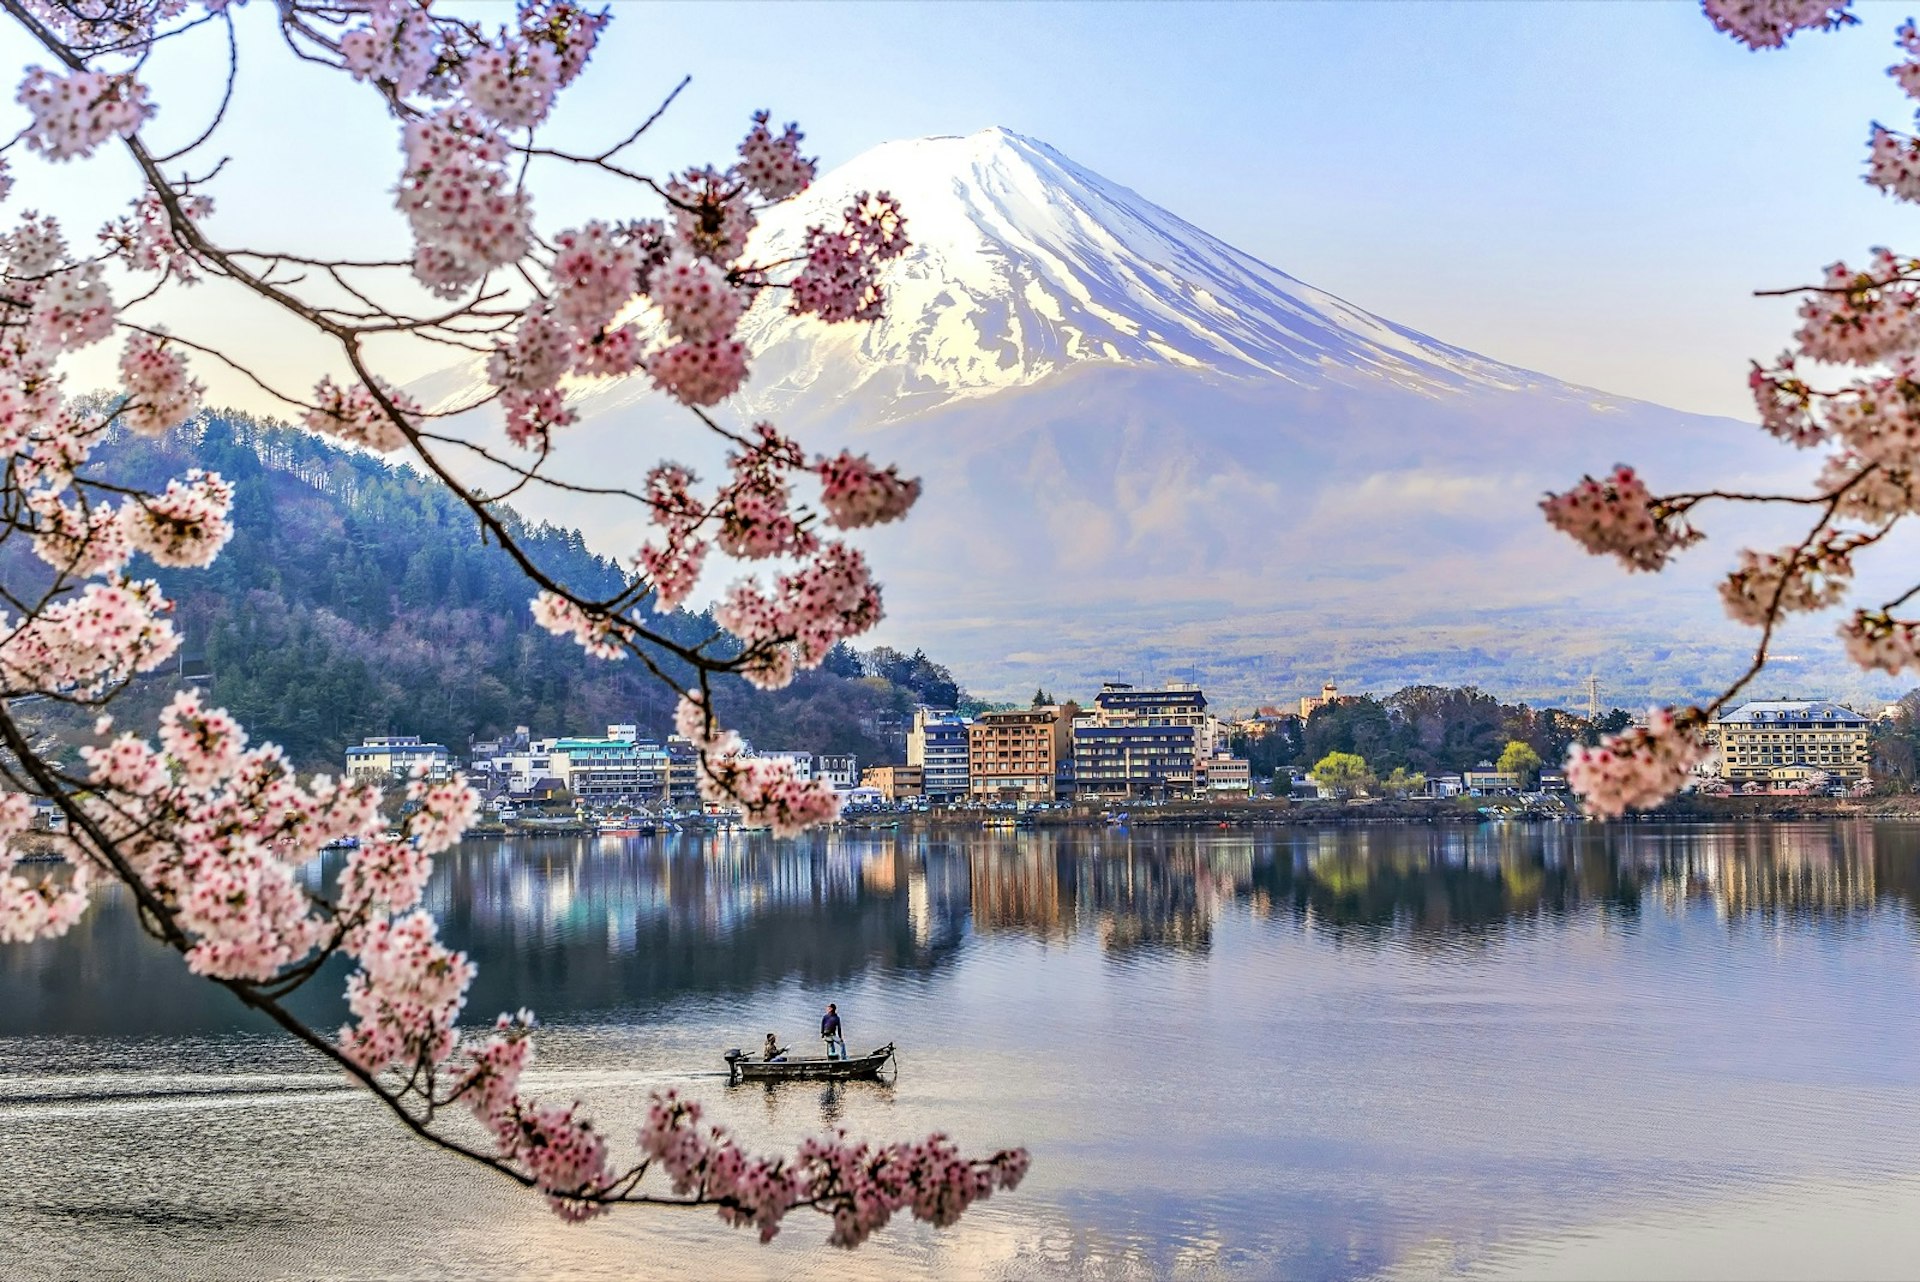 Snow capped Mt Fuji with a small village at its base framed by pink cherry blossoms